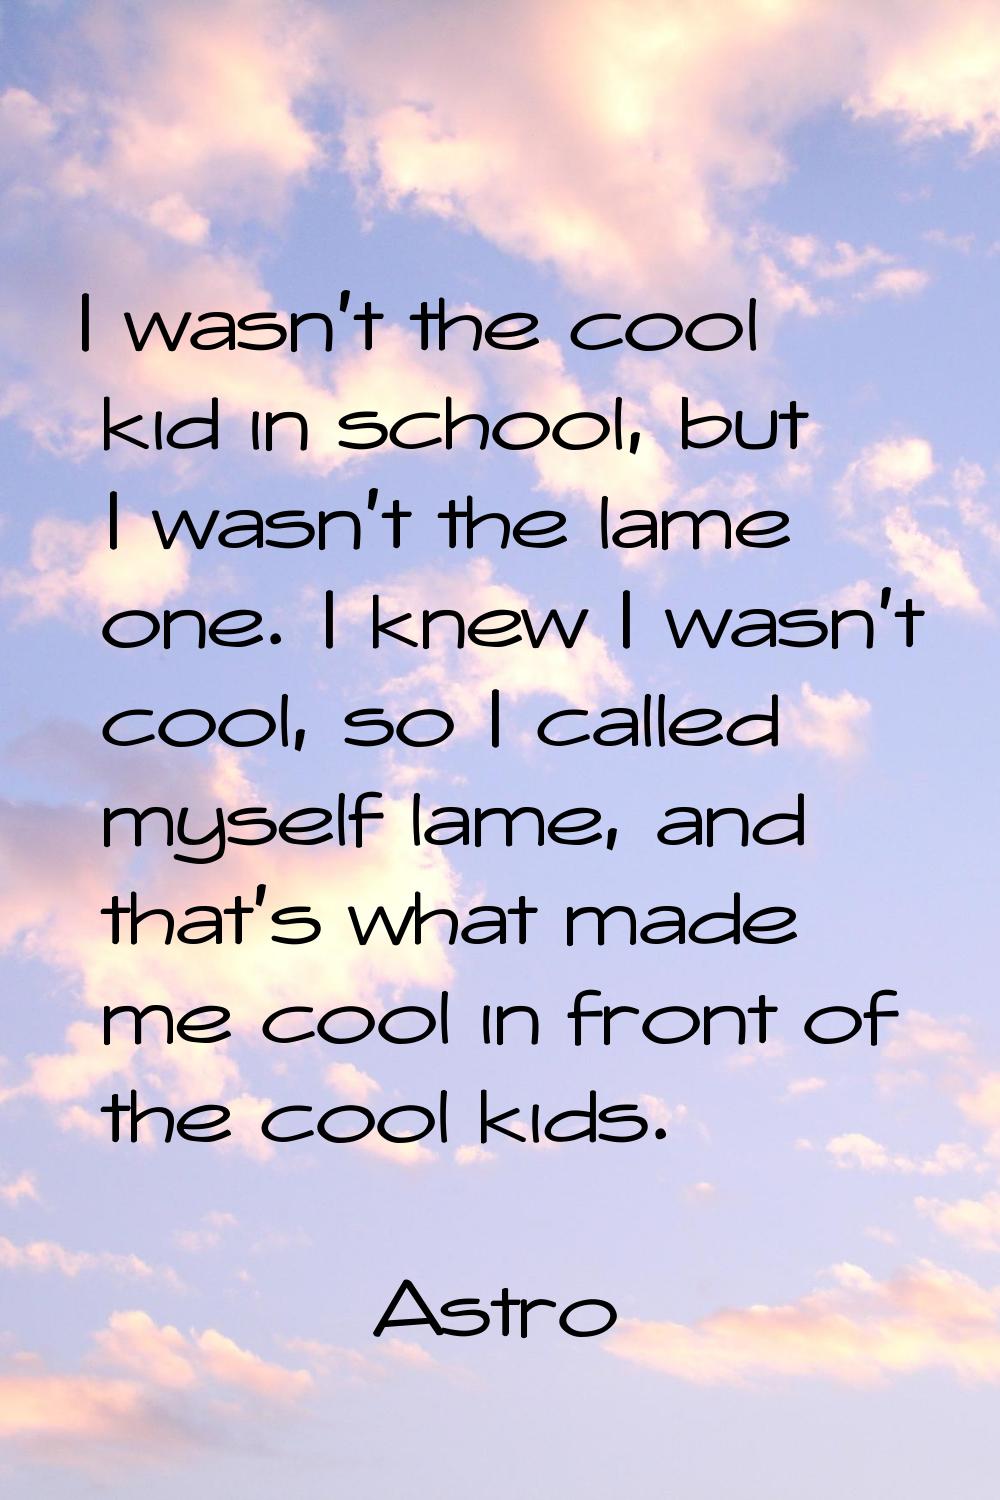 I wasn't the cool kid in school, but I wasn't the lame one. I knew I wasn't cool, so I called mysel